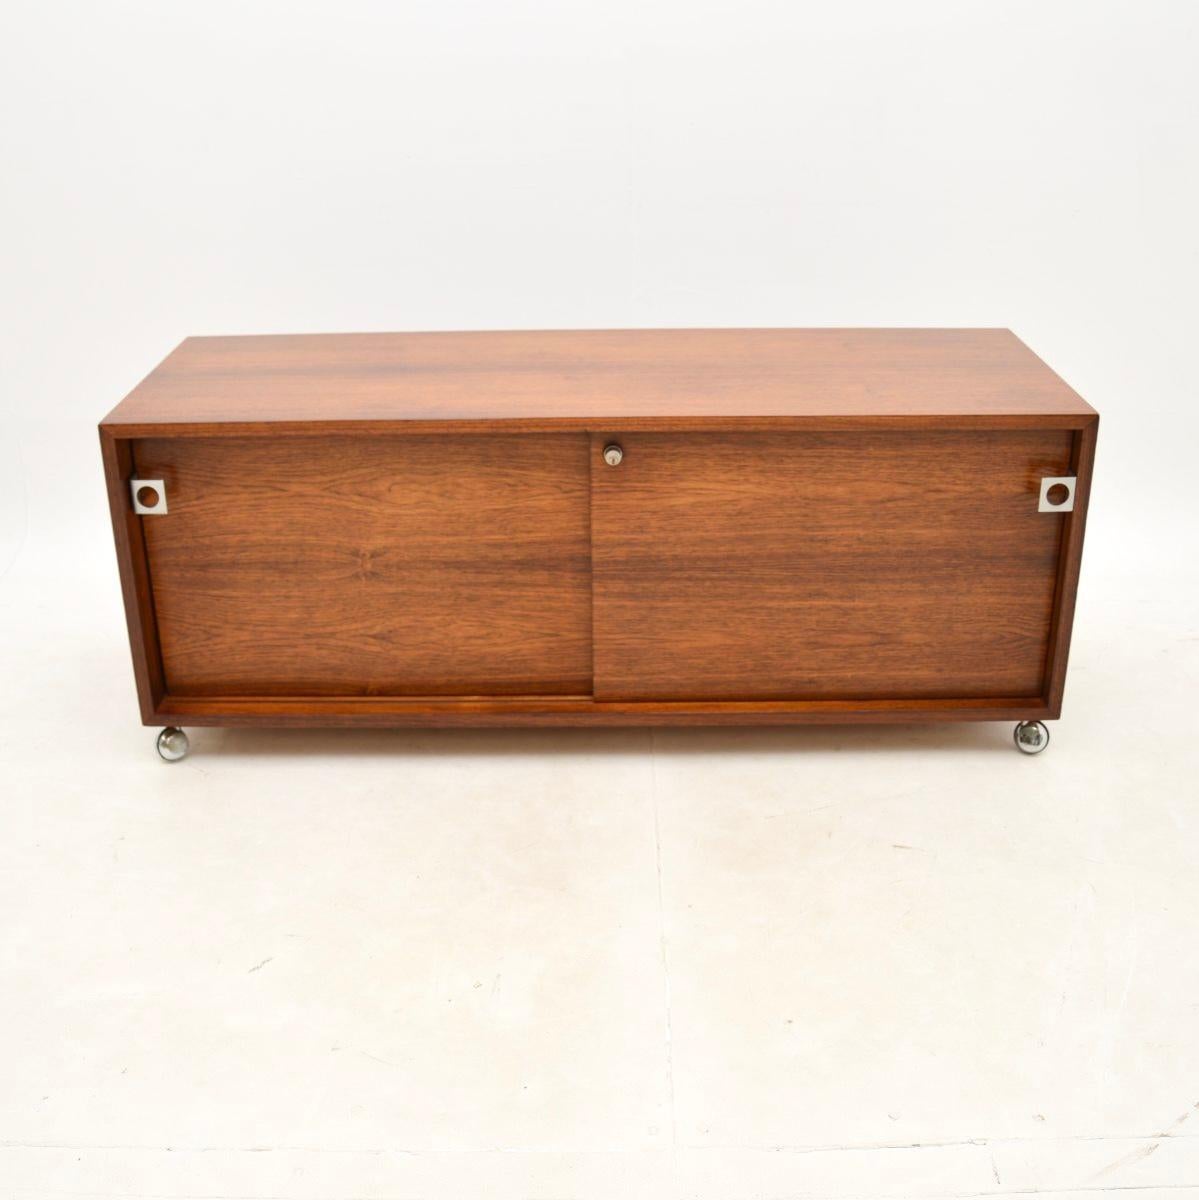 A stunning and extremely rare Danish vintage cabinet / sideboard by Bodil Kjaer. This was designed in 1959 as part of a whole office range, this piece dates from the 1960’s. It was made in Denmark by E. Pedersen & Søn.

The quality is outstanding,